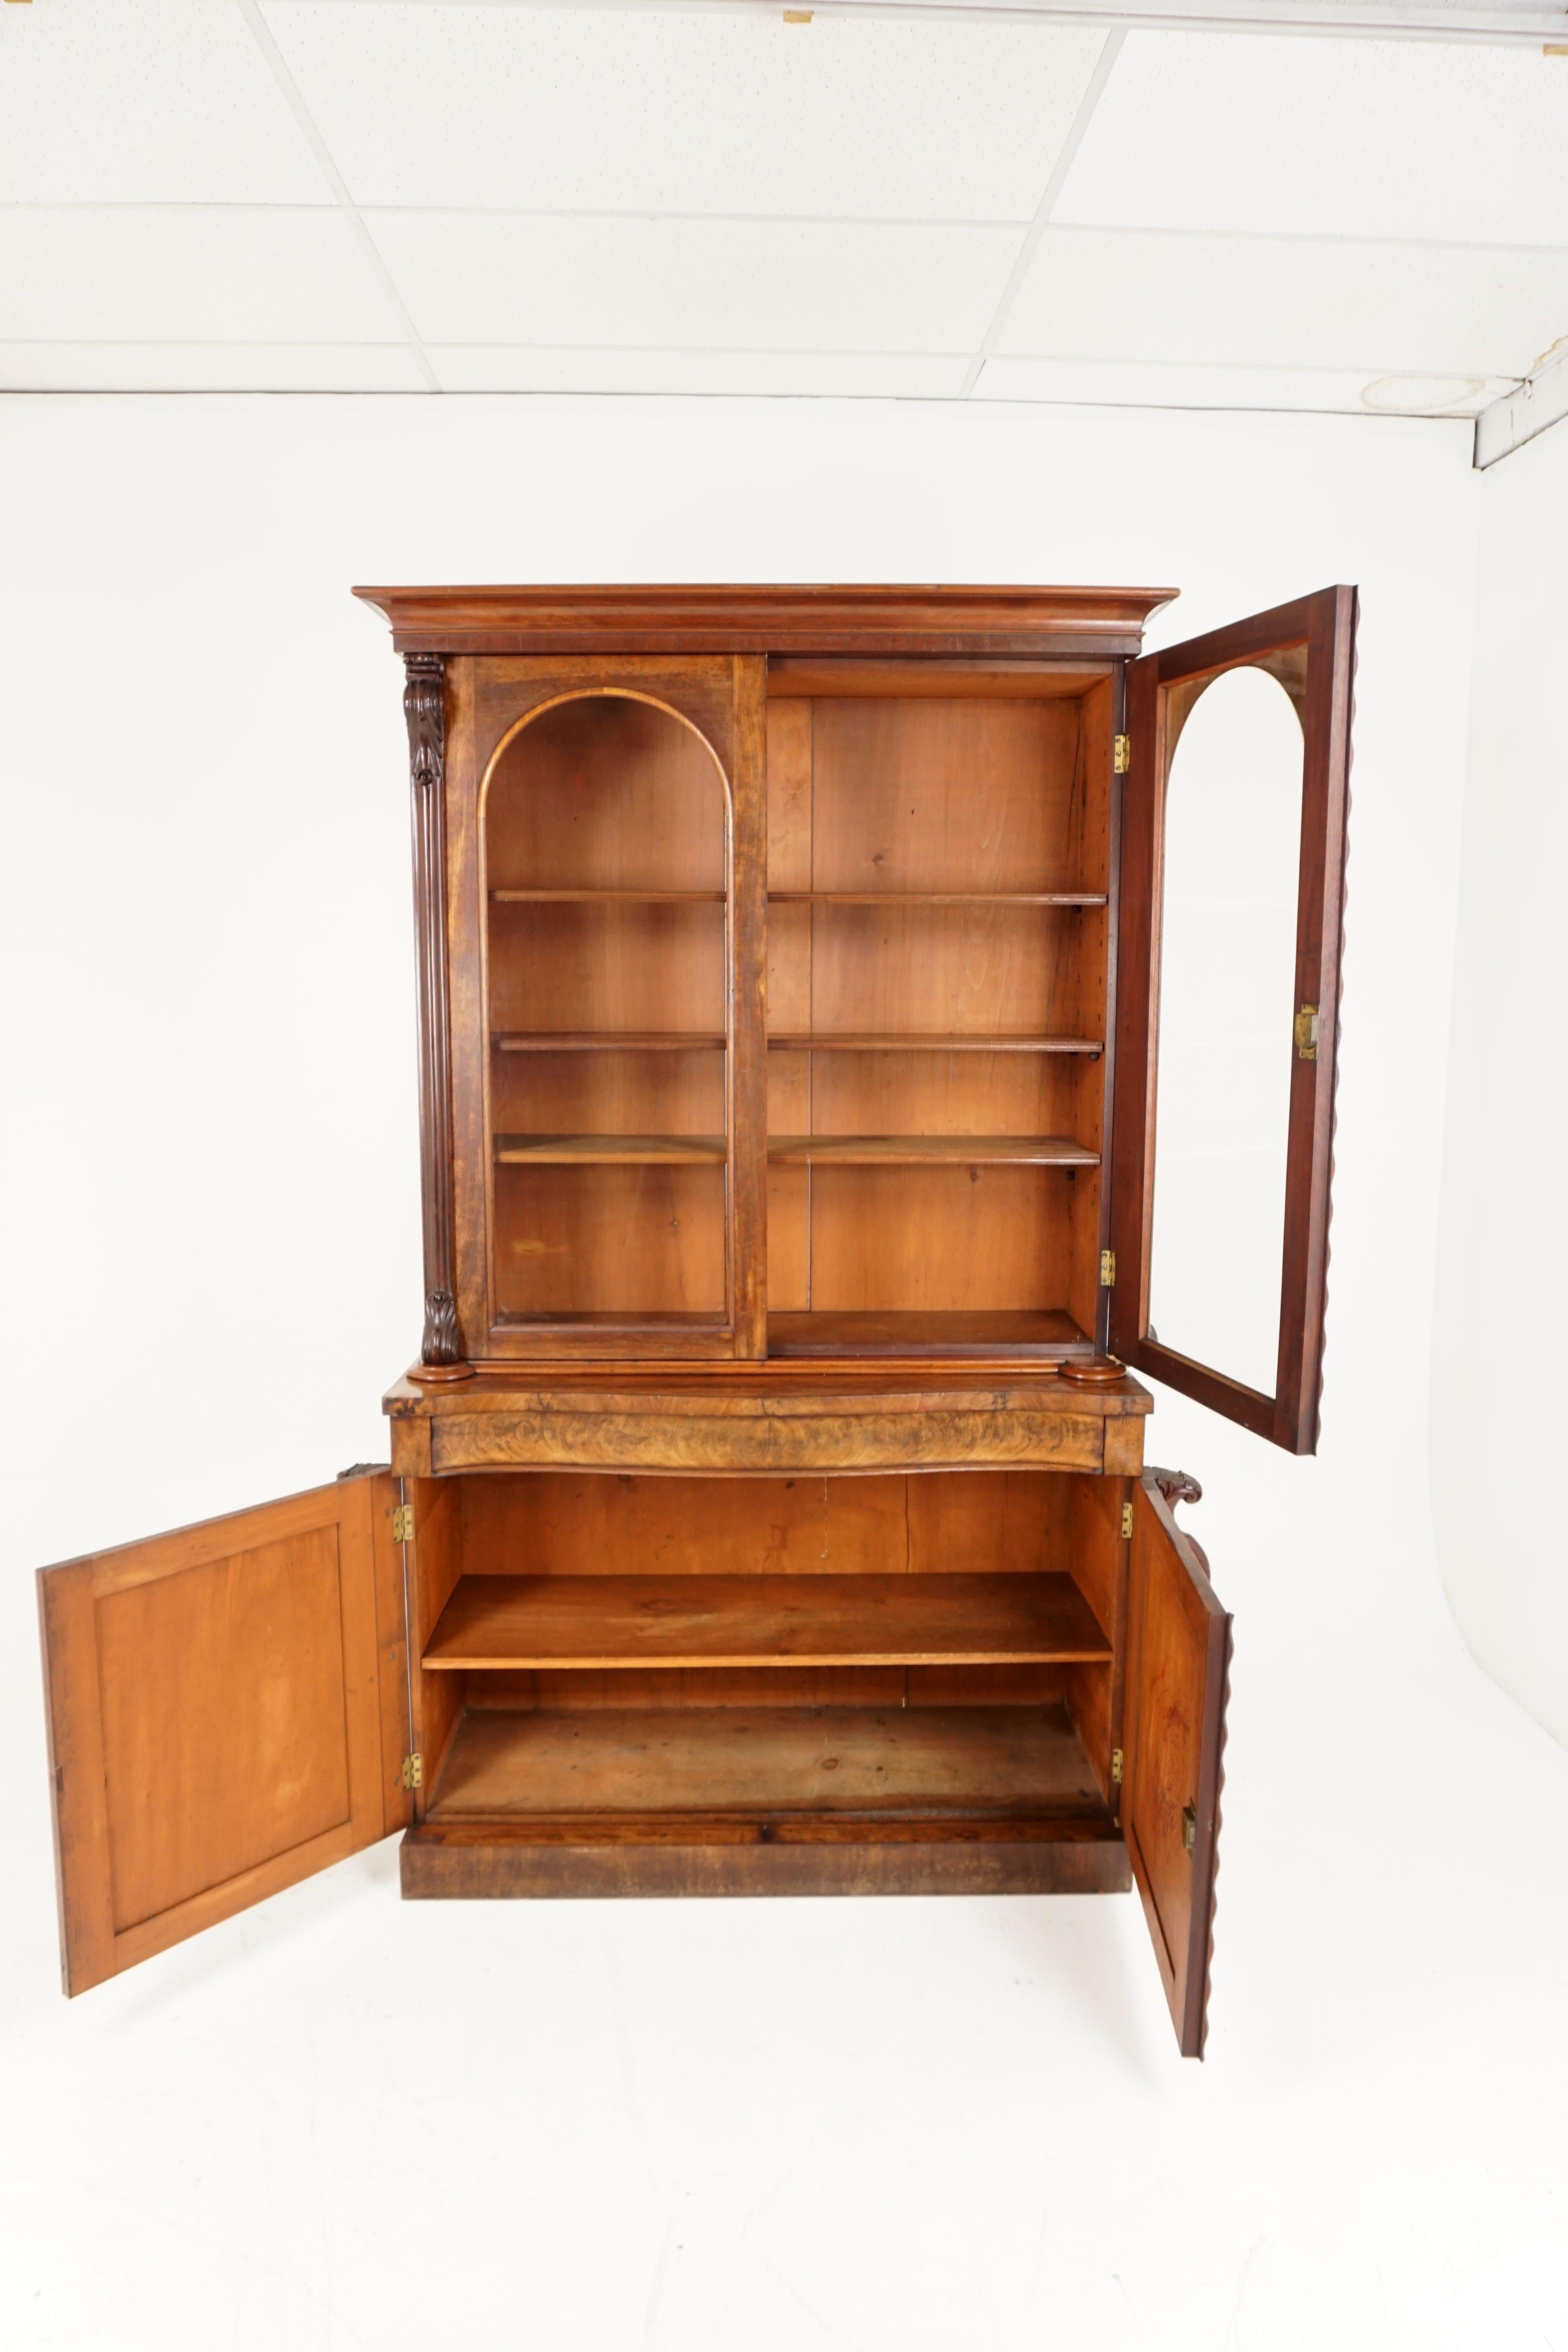 Antique mahogany bookcase, large Victorian cabinet bookcase, antique Furniture, Scotland 1870, B1828

Scotland, 1870
Solid mahogany and veneer
Original finish
Large overhang cornice on top
Pair of shaped original glass
Doors underneath
Open